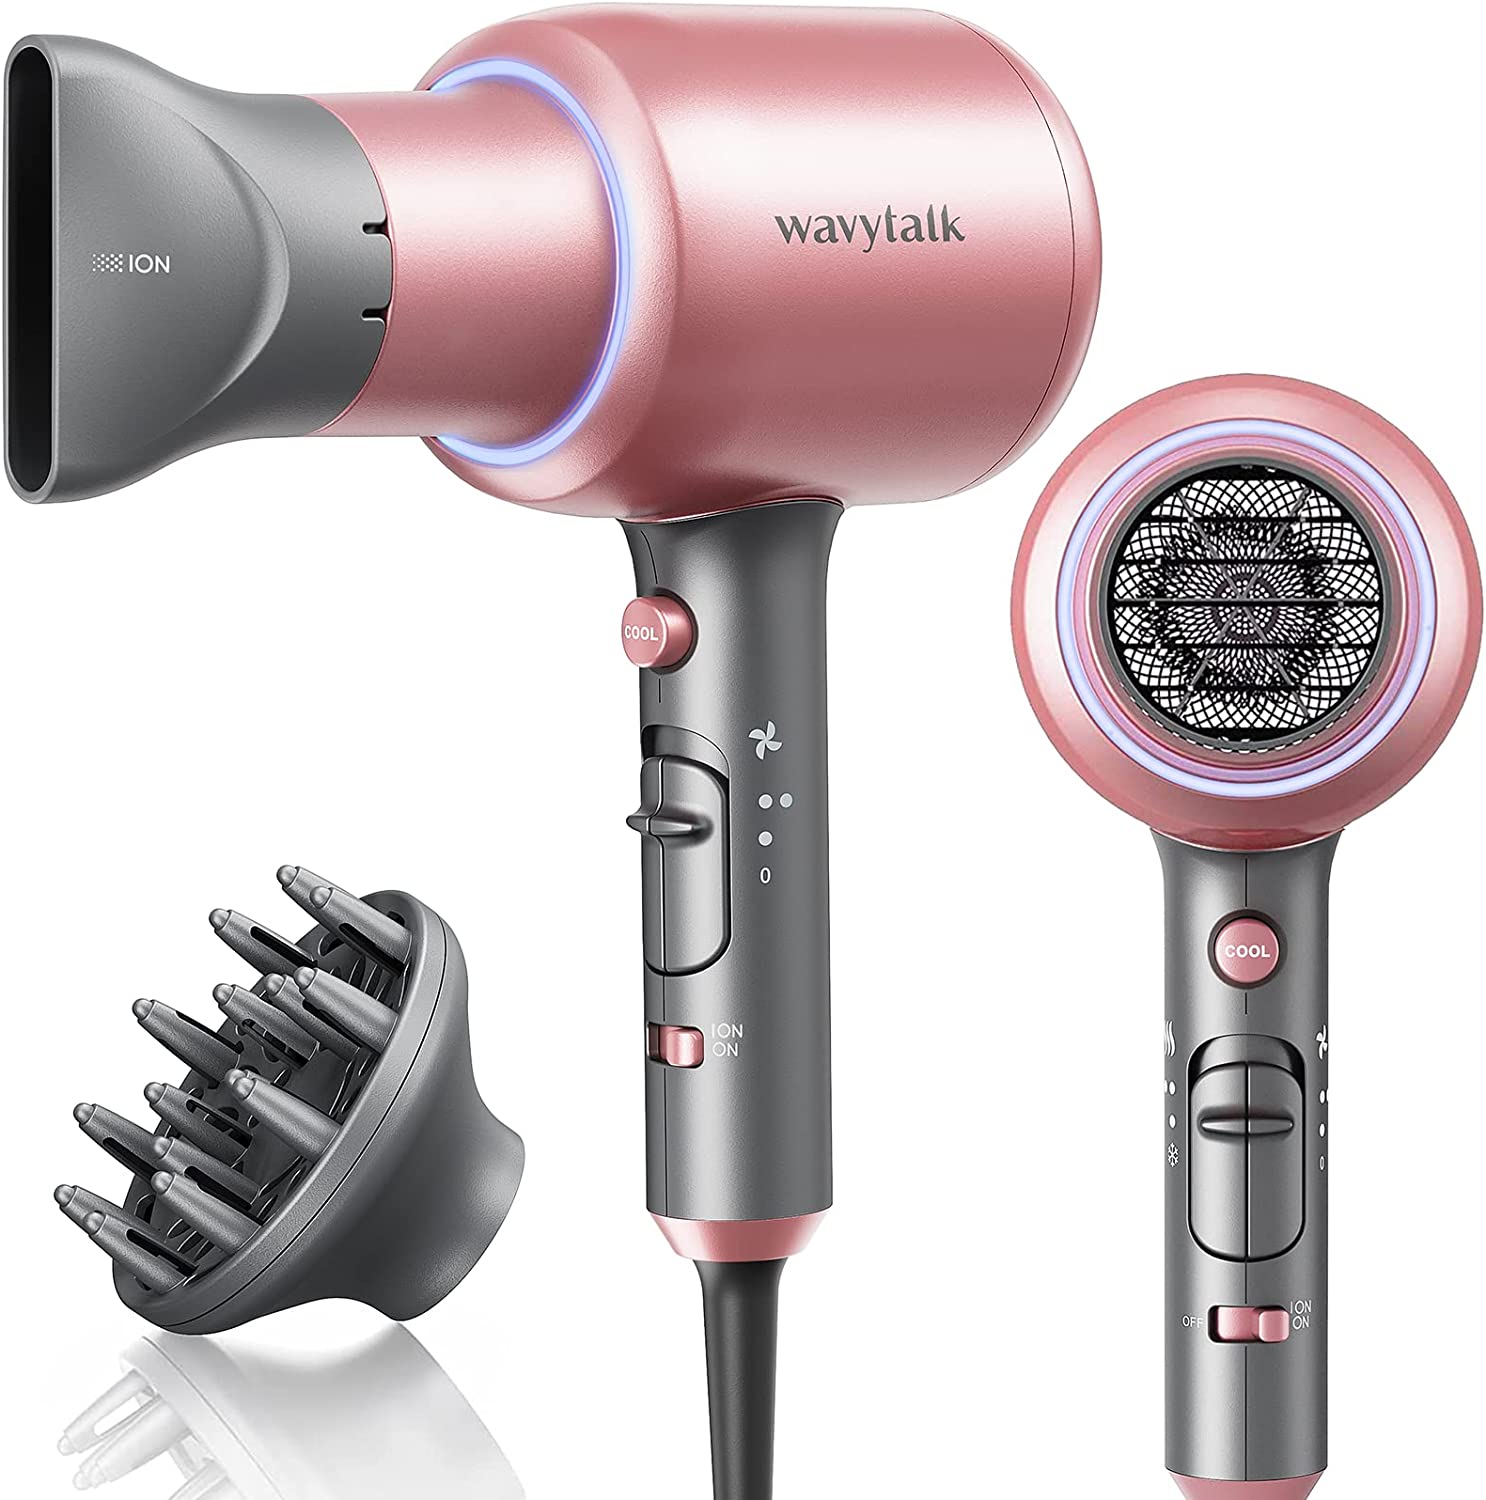 Wavytalk Professional Ionic Hair Dryer Blow Dryer with [...]